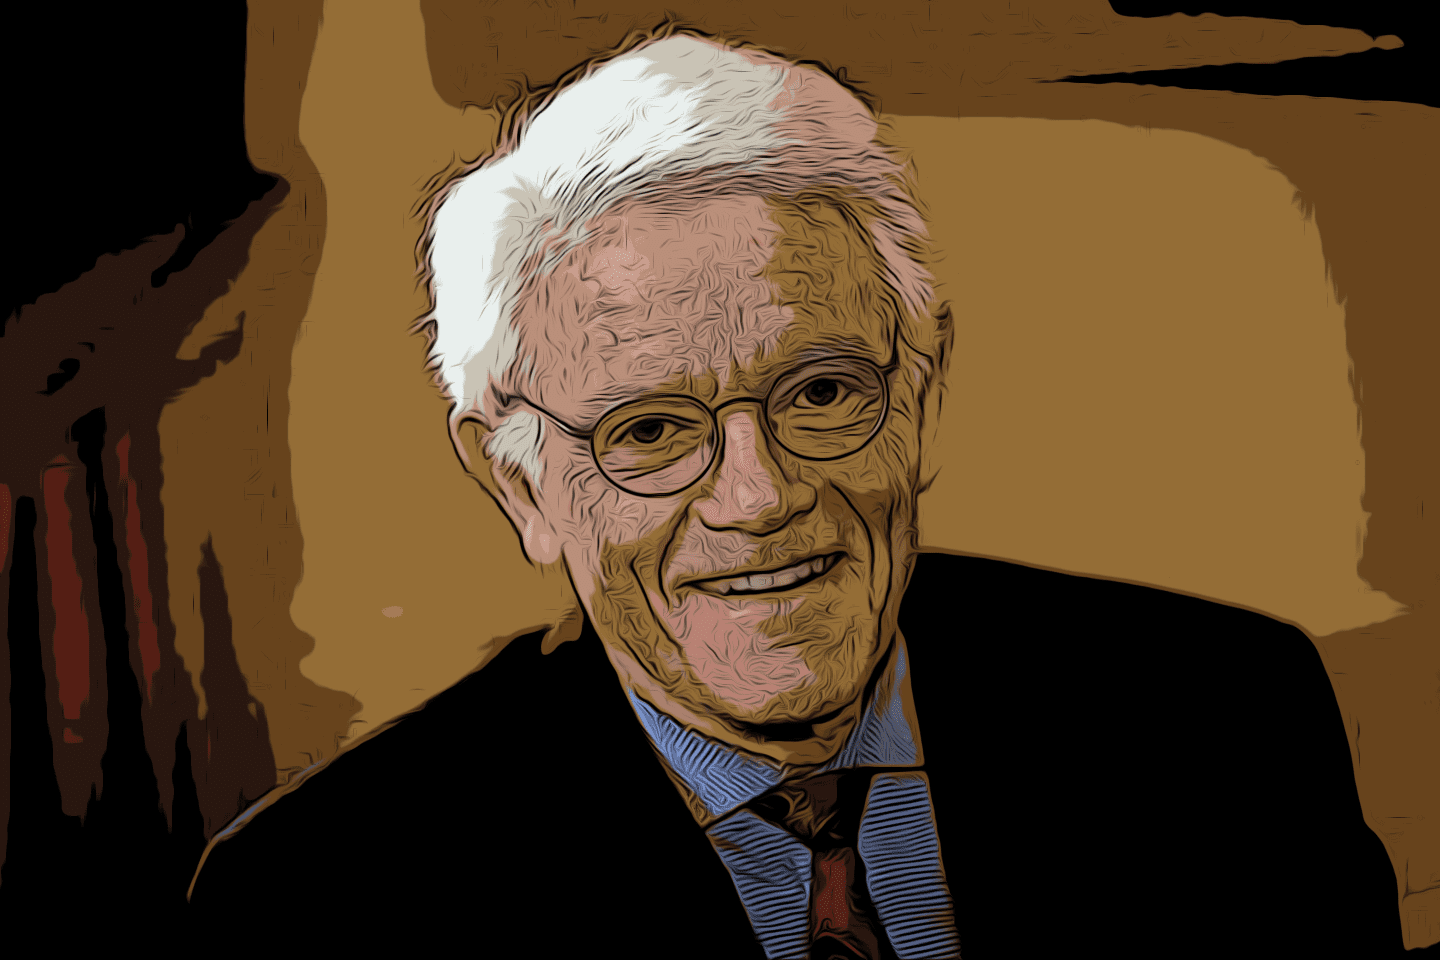 An image depicting an elderly gentleman wearing glasses and a tie, exuding a dignified aura.